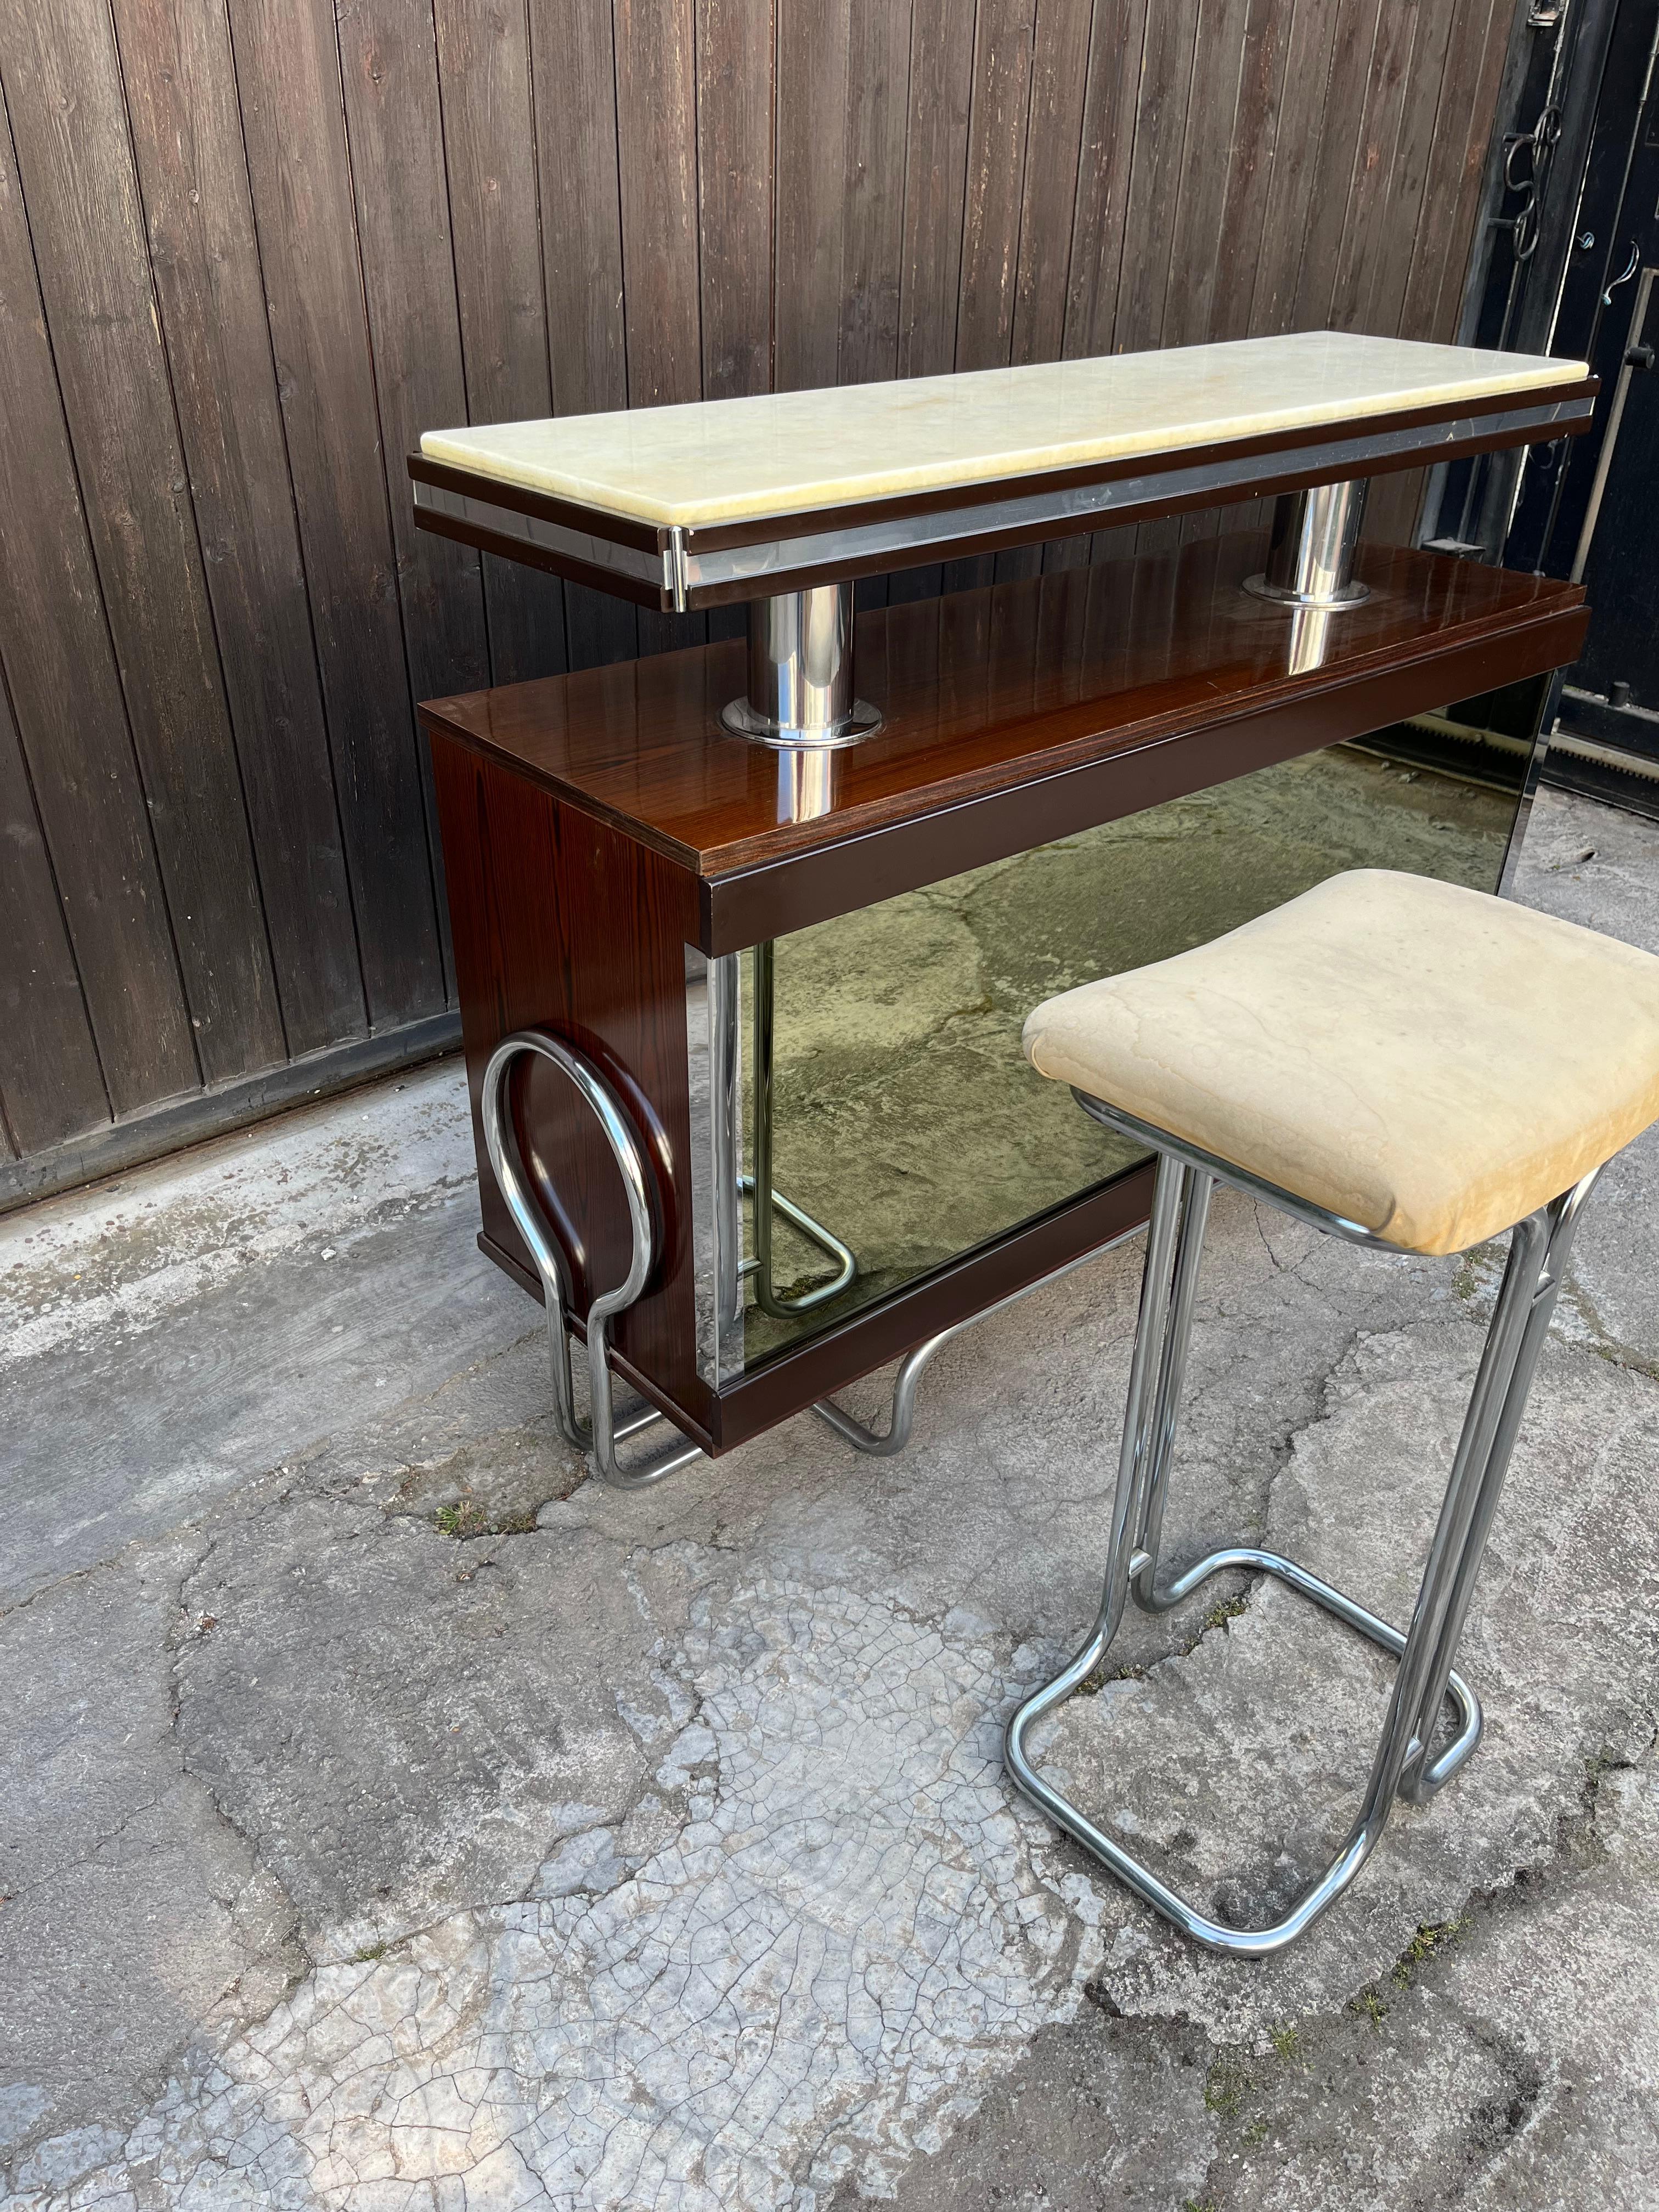 Vintage mirrored bar cabinet with stool attributed to Luciano Frigerio 1970s.
Made of wood and steel, it is partially covered with mirror and has a marble top.
Equipped with stool with steel structure.
Intact and in good condition, small signs of